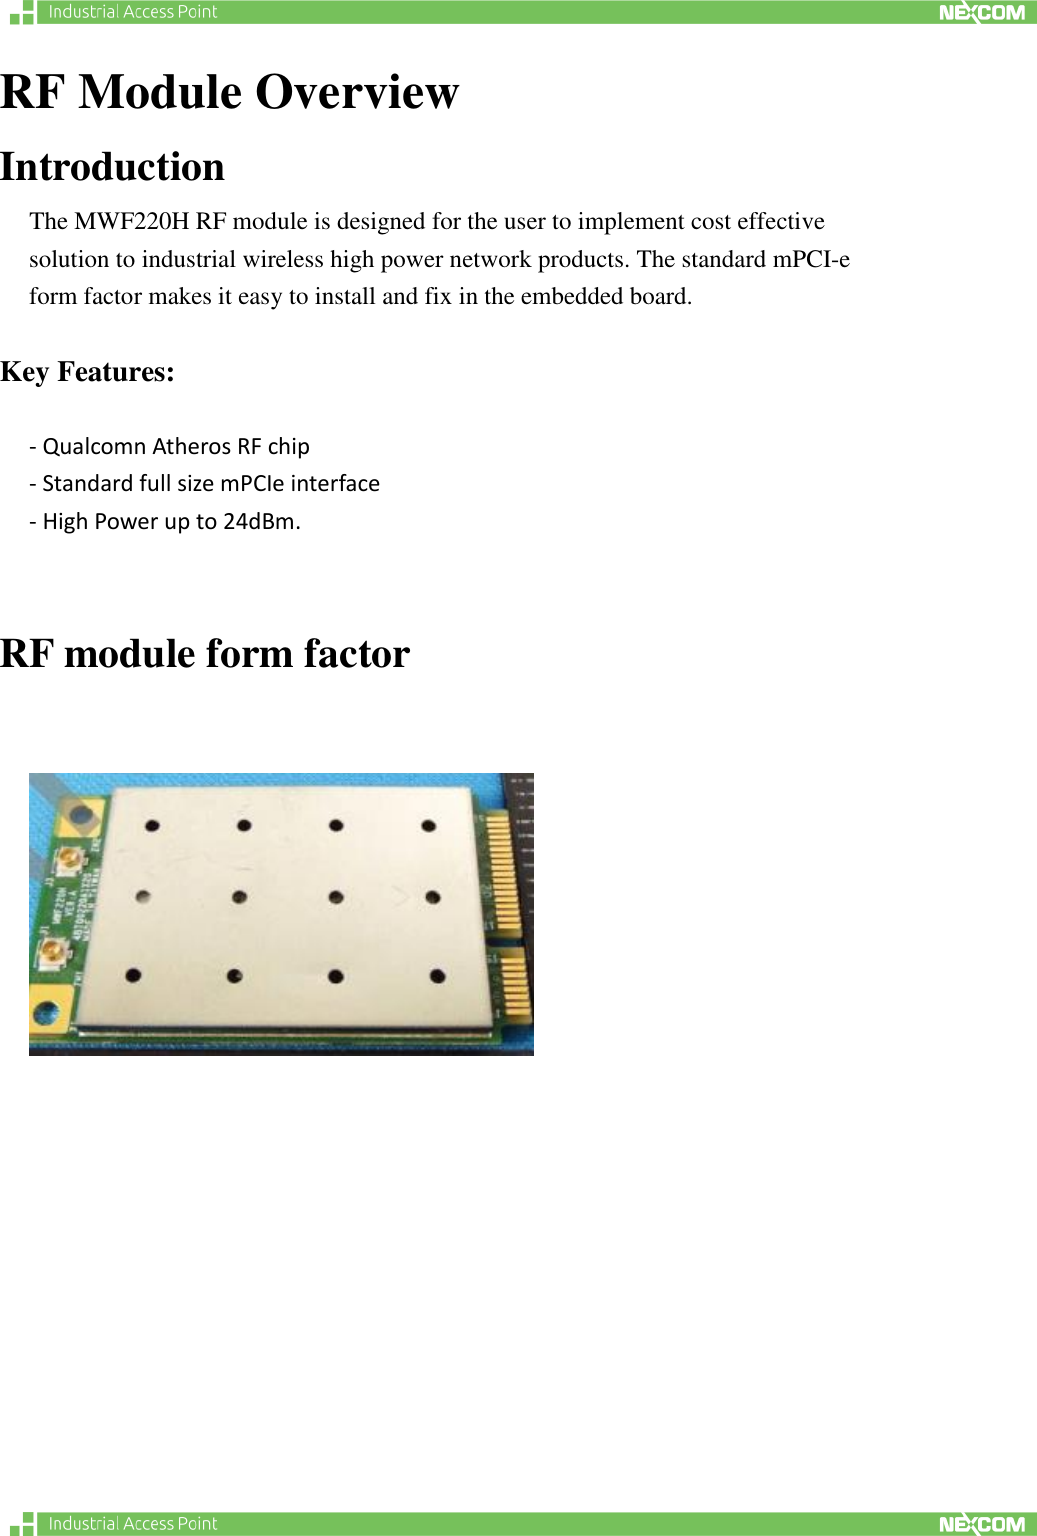   RF Module Overview Introduction The MWF220H RF module is designed for the user to implement cost effective solution to industrial wireless high power network products. The standard mPCI-e form factor makes it easy to install and fix in the embedded board.      Key Features:  - Qualcomn Atheros RF chip - Standard full size mPCIe interface   - High Power up to 24dBm.    RF module form factor           